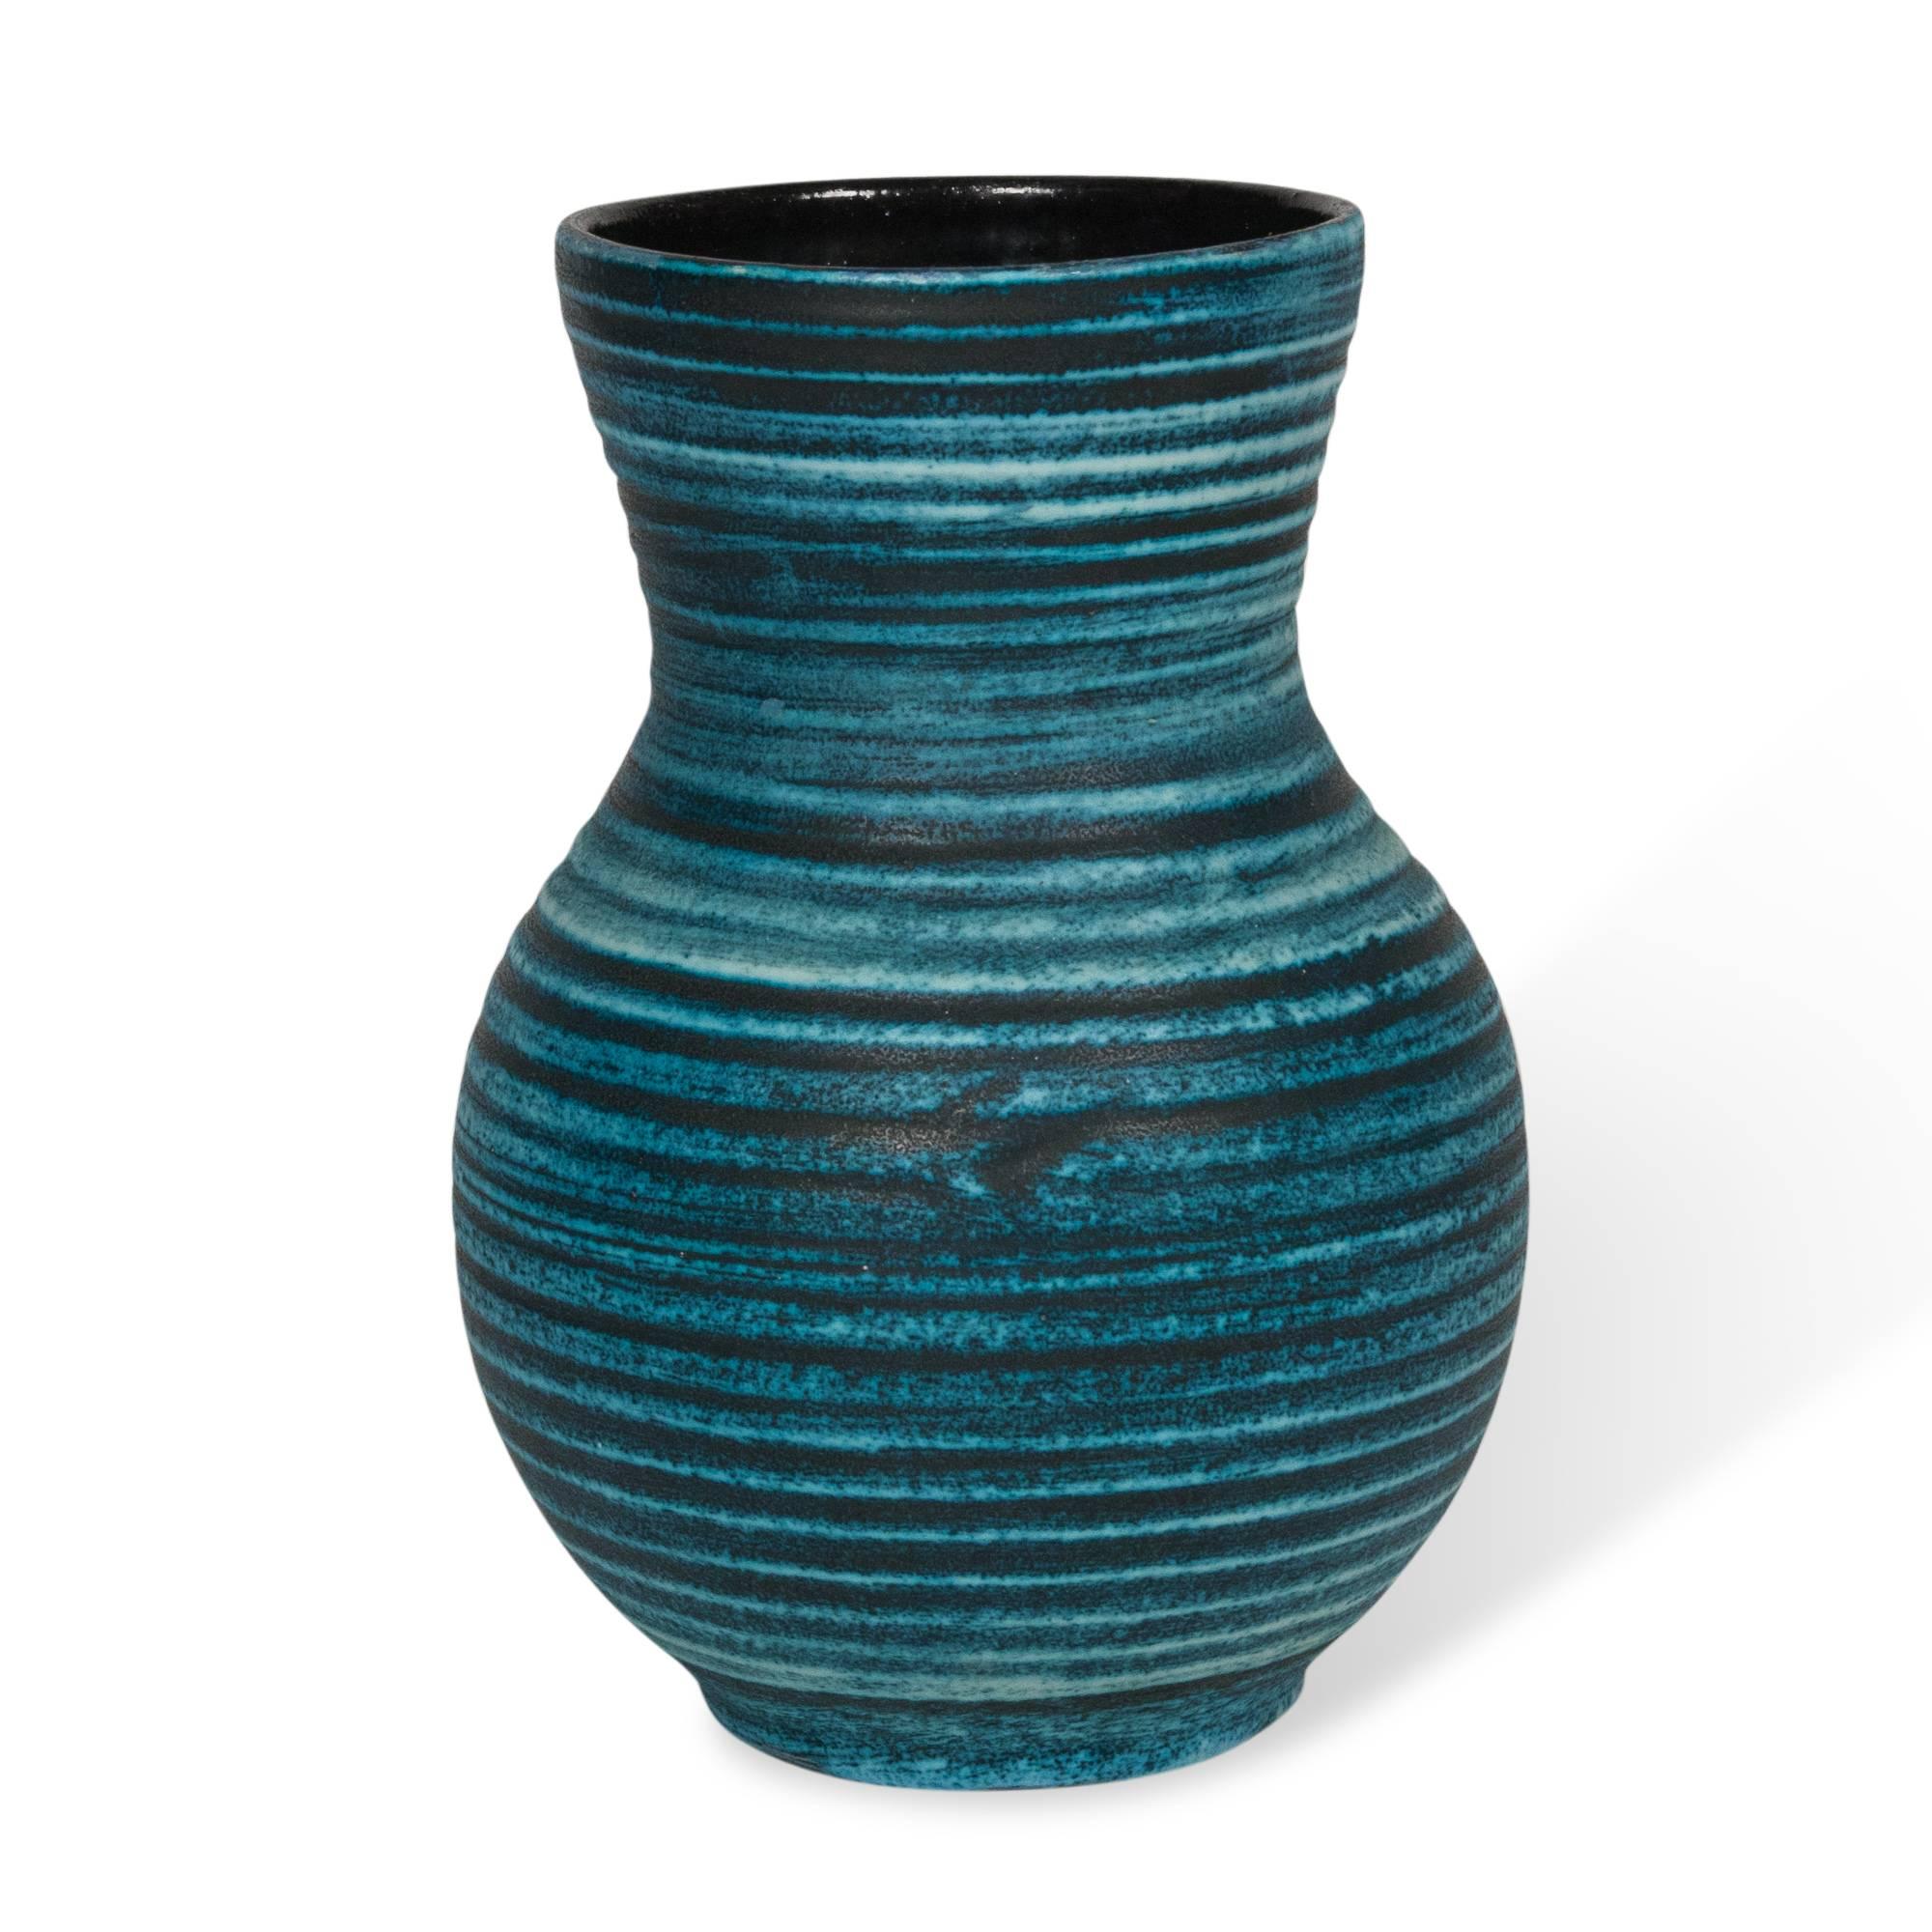 Blue banded ceramic vase, ovoid shape with flared rim, the pale blue bands over a darker blue base with a black inteior. By Accolay, France, 1960s. Signed to underside. Measures: Height 12 in, diameter of opening 6 in.